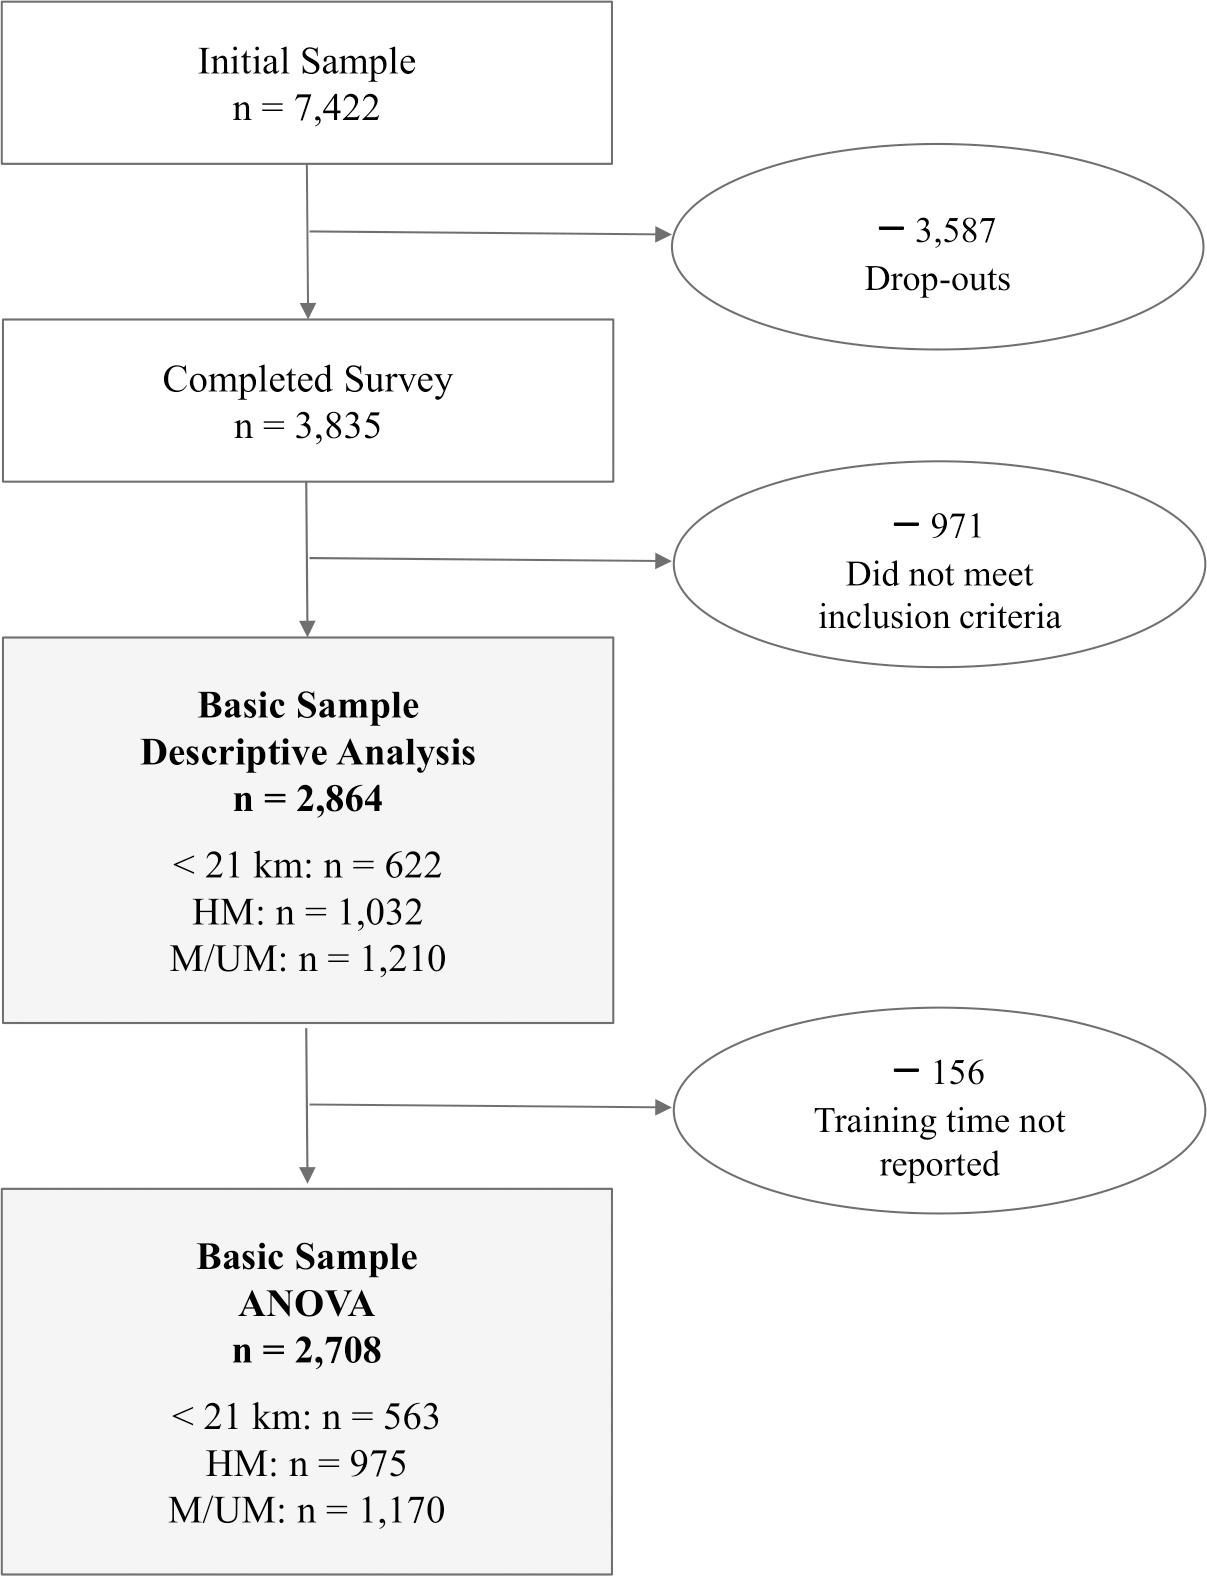 Frontiers Training and Racing Behavior of Recreational Runners by Race Distance—Results From the NURMI Study (Step 1)